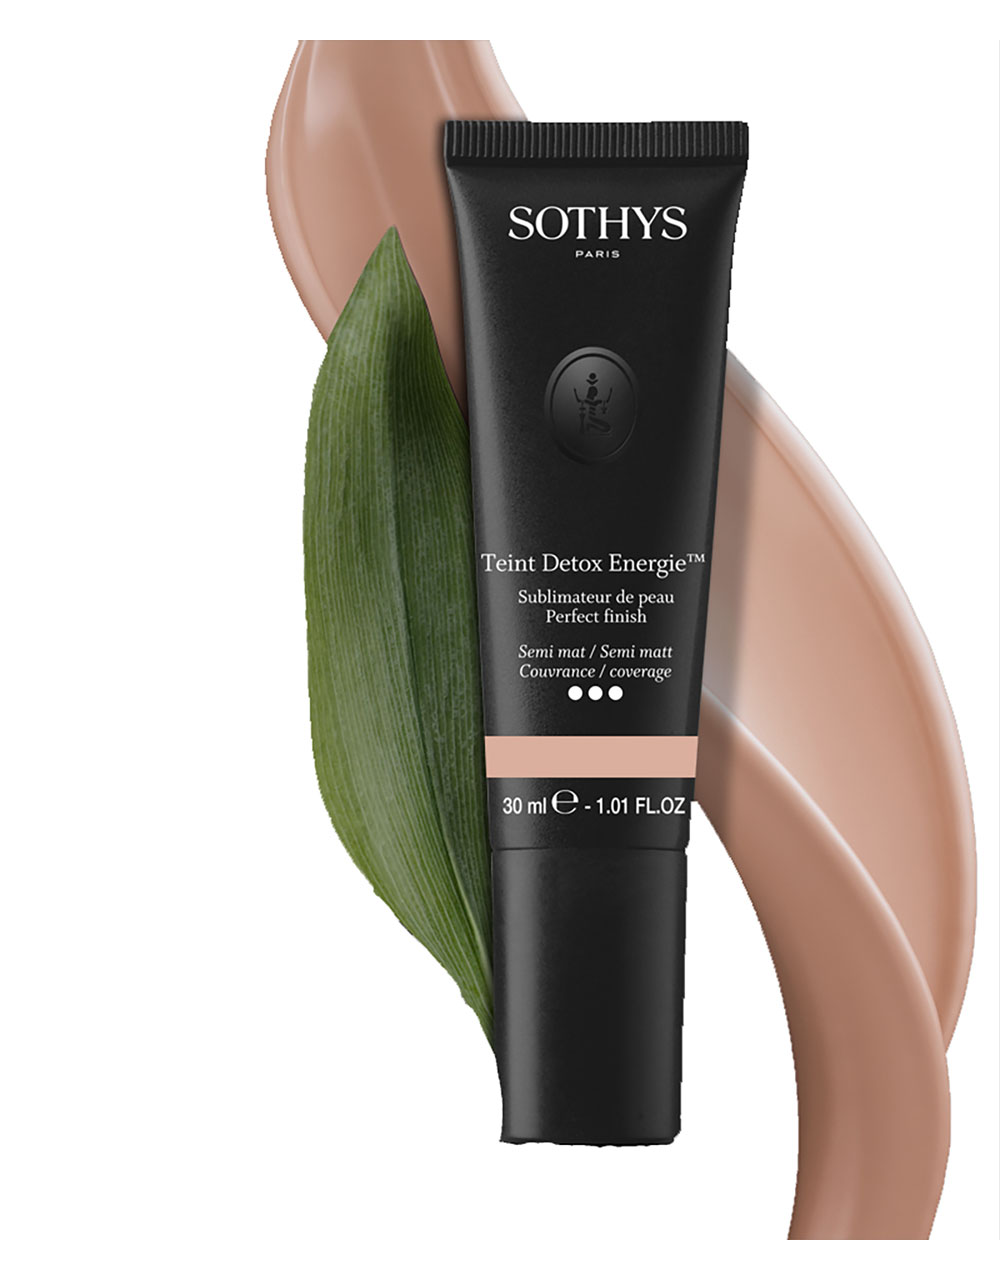 Sothys Teint Detox Energie Perfect Finish Foundation - 1.01 oz Questions & Answers